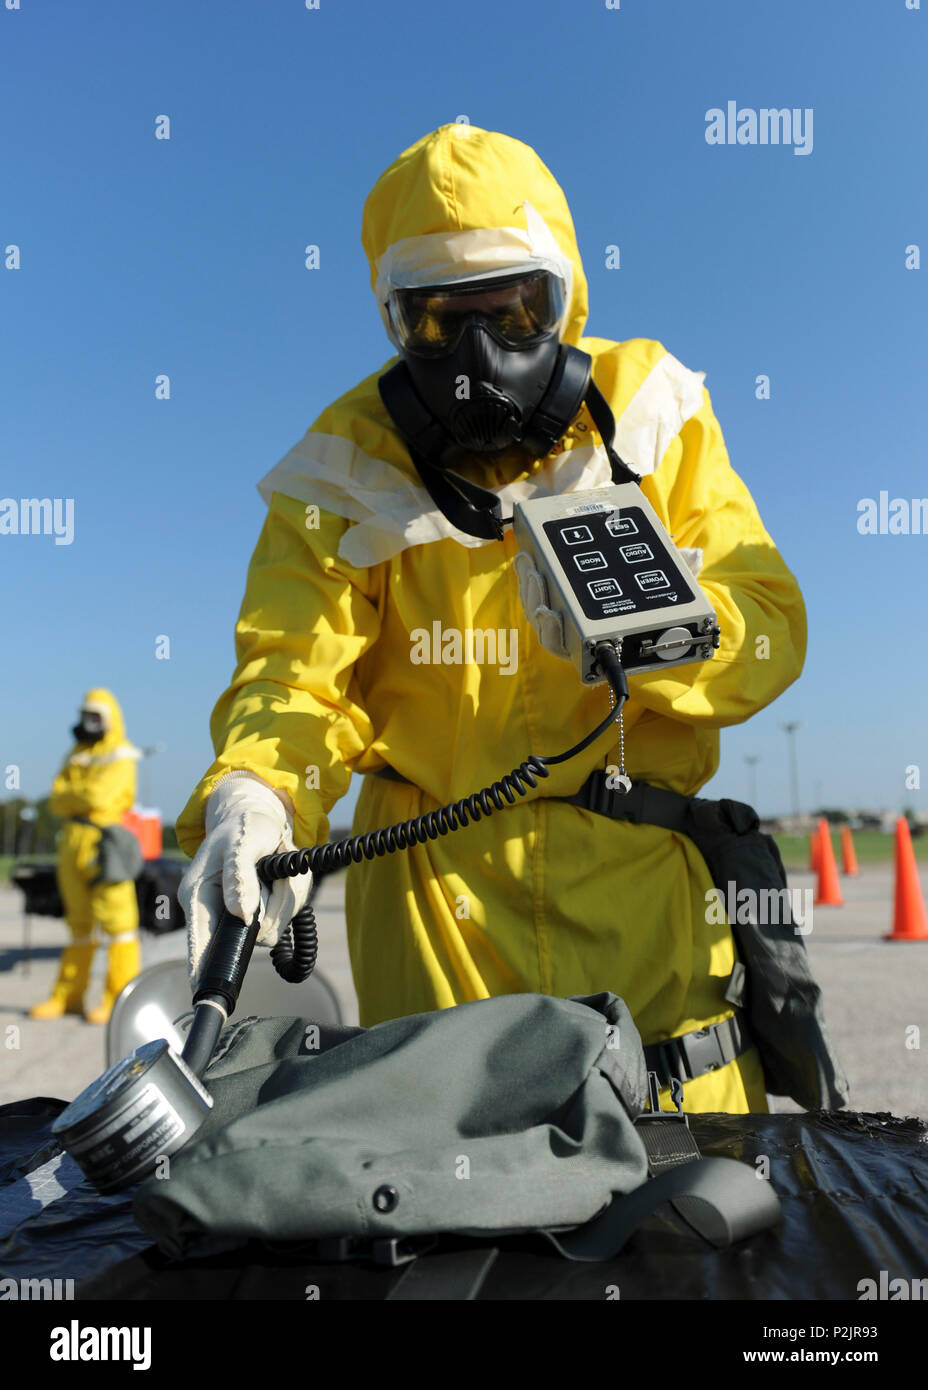 An Emergency Management Support Team (EMST) member simulates checking alpha radiation levels during training at Whiteman Air Force Base, Mo., Sept. 21, 2016. The EMST use ADM-300 multi-functional survey instruments to detect, measure and digitally display alpha, beta, gamma, and x-rays. (U.S. Air Force photo by Senior Airman Danielle Quilla) Stock Photo